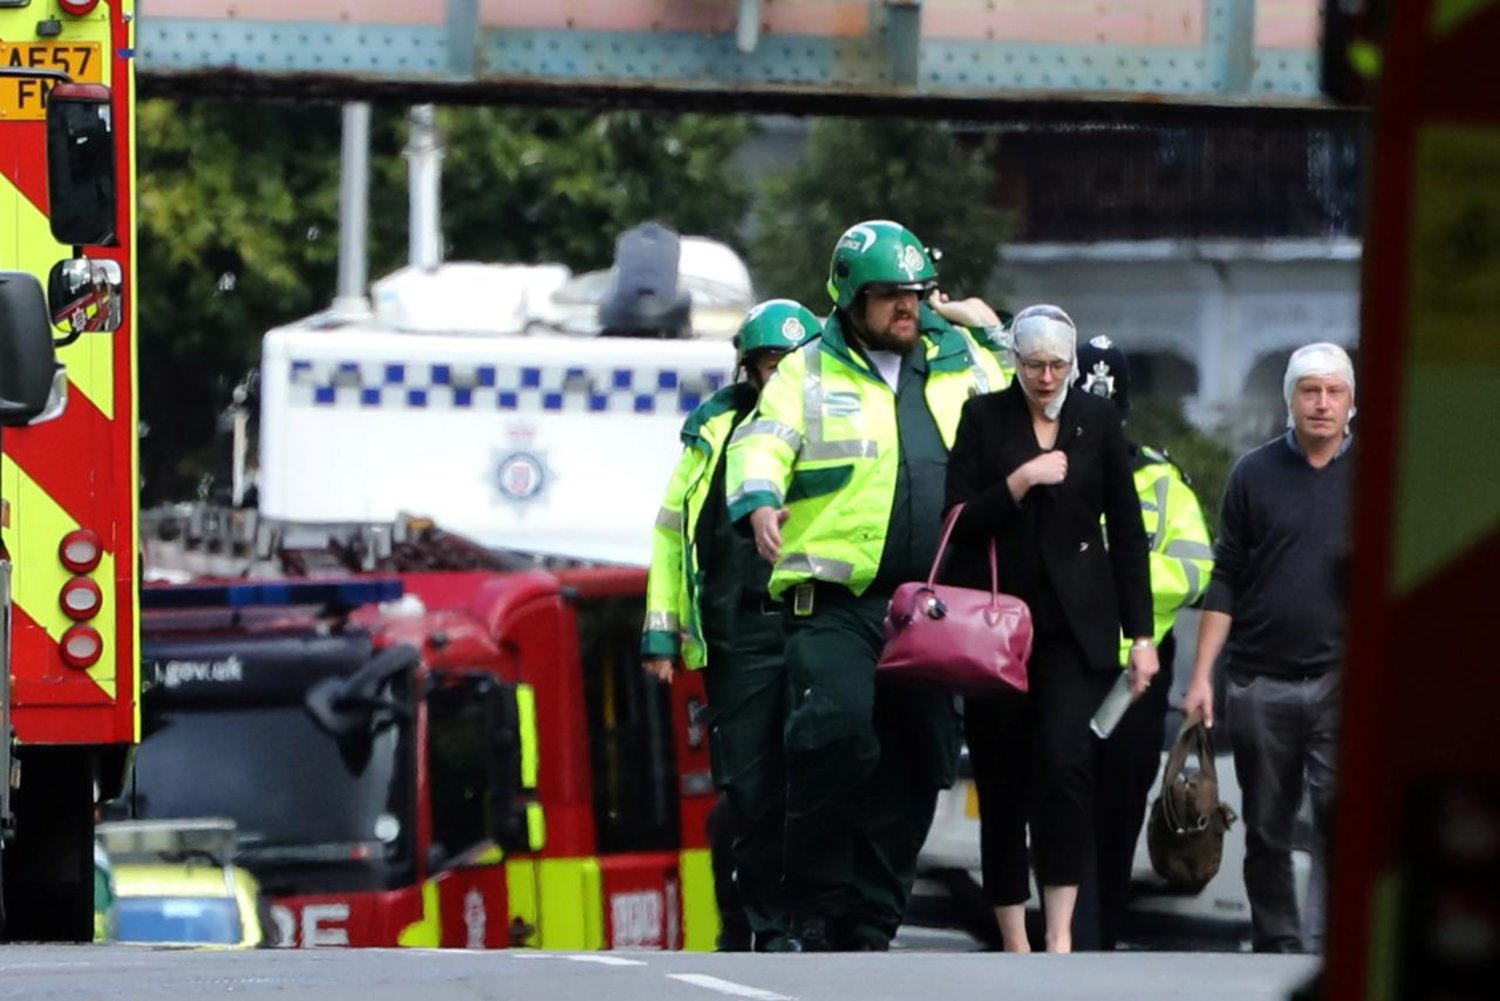 An injured woman is led away after the terrorist attack at Parsons Green underground station in London, Britain, September 15, 2017. REUTERS/Luke MacGregor 